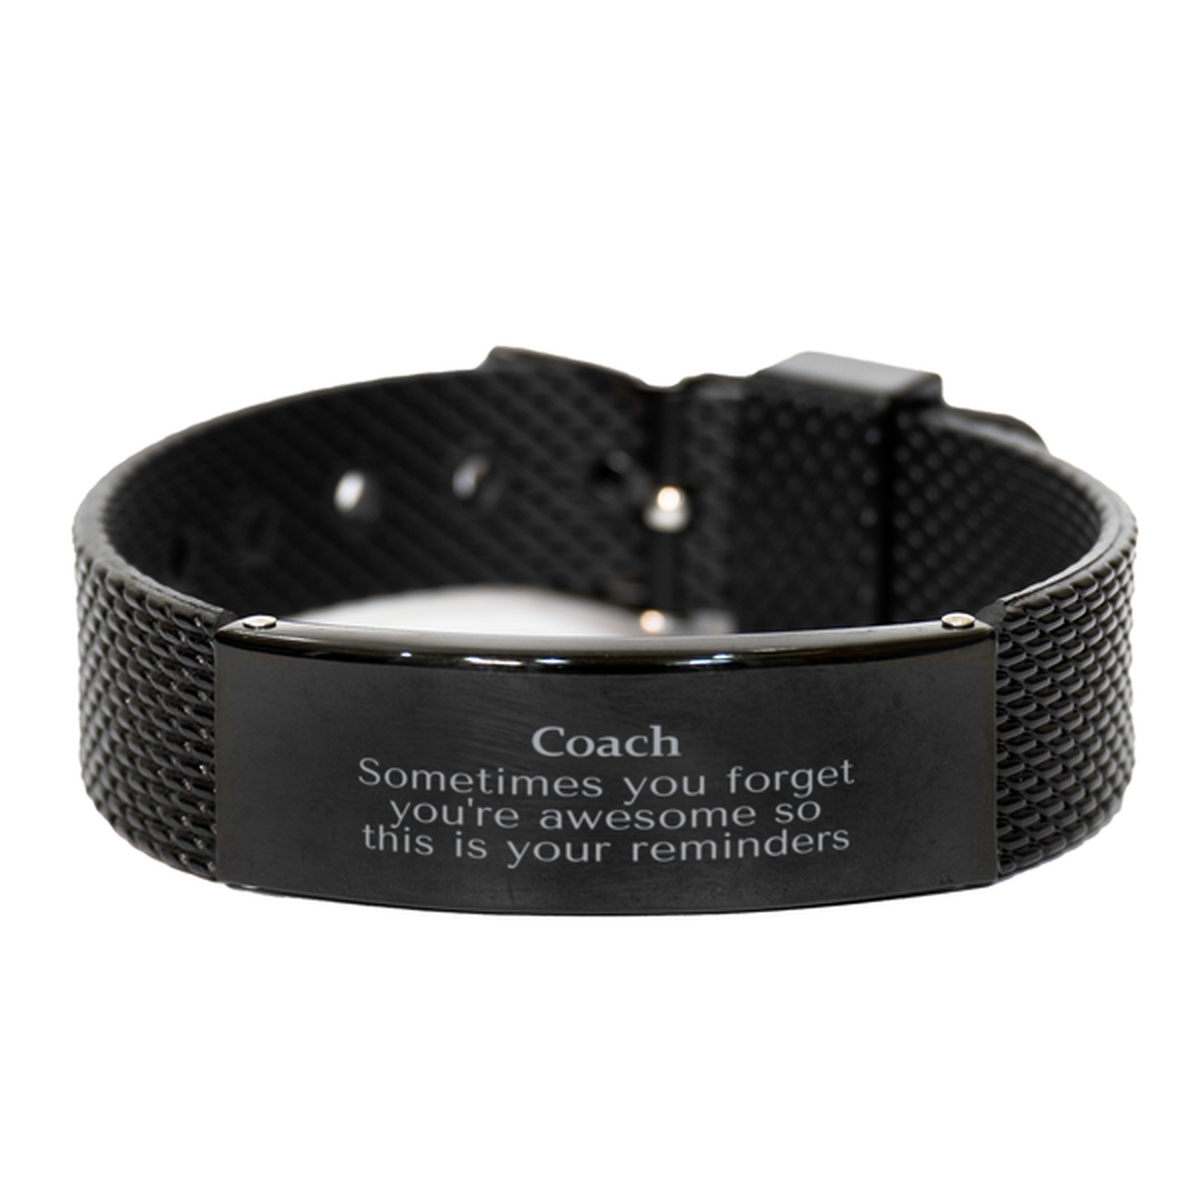 Sentimental Coach Black Shark Mesh Bracelet, Coach Sometimes you forget you're awesome so this is your reminders, Graduation Christmas Birthday Gifts for Coach, Men, Women, Coworkers